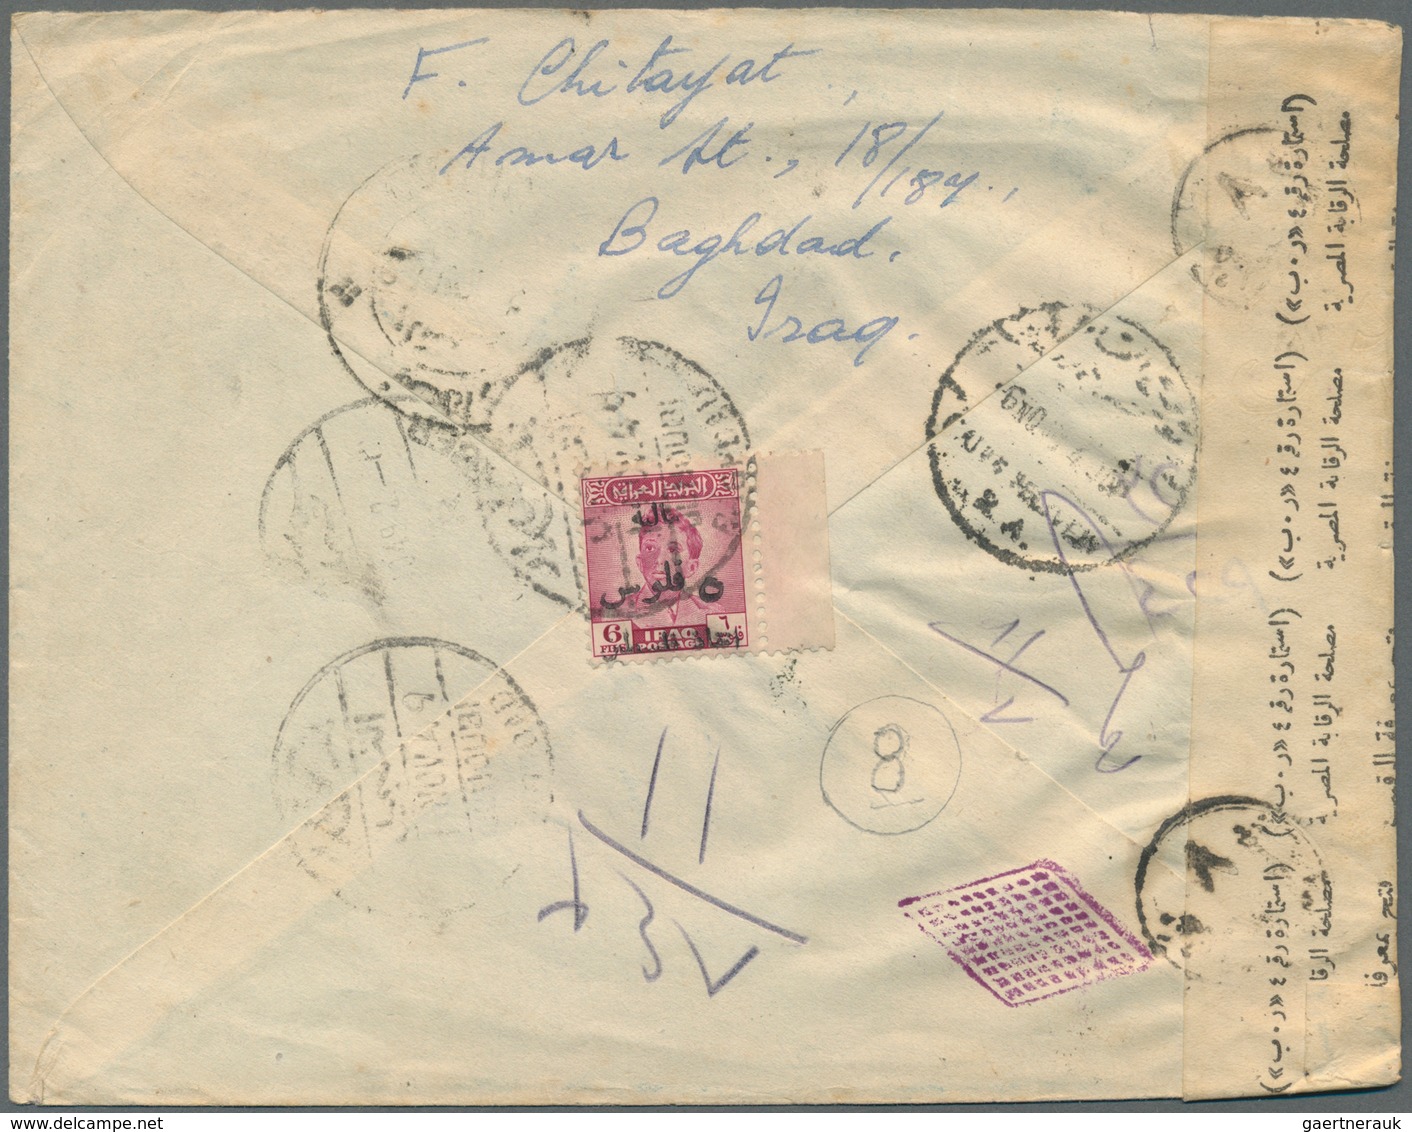 Irak: 1949, 20 F., 40 F. And 50 F. UPU Tied "DOUBI BAGDHAD 1 NOV 49"to Censored Air Mail Cover To Al - Iraq